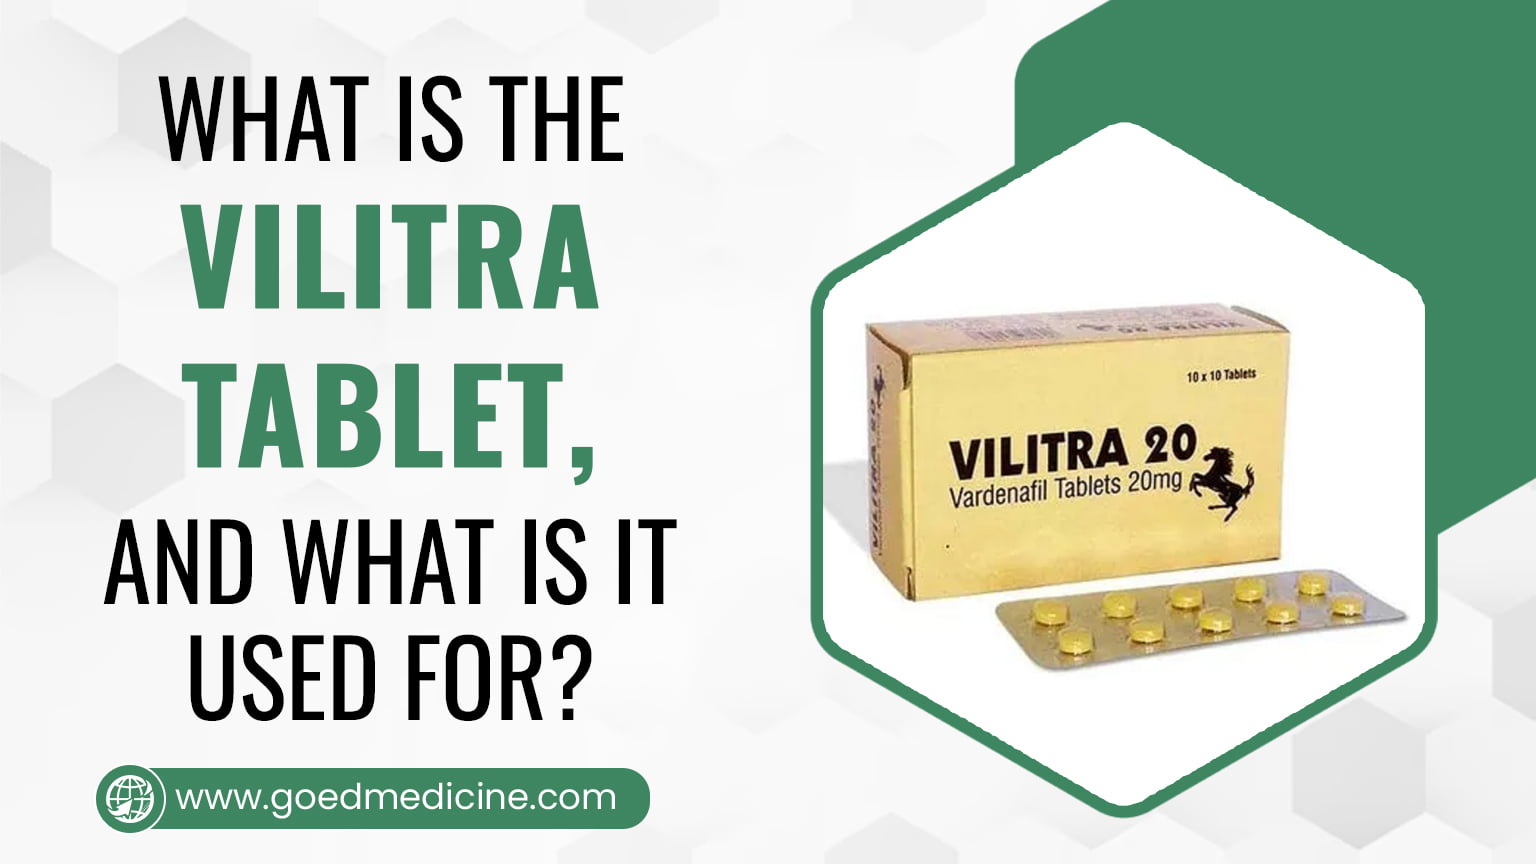 What is the Vilitra tablet, and what is it used for